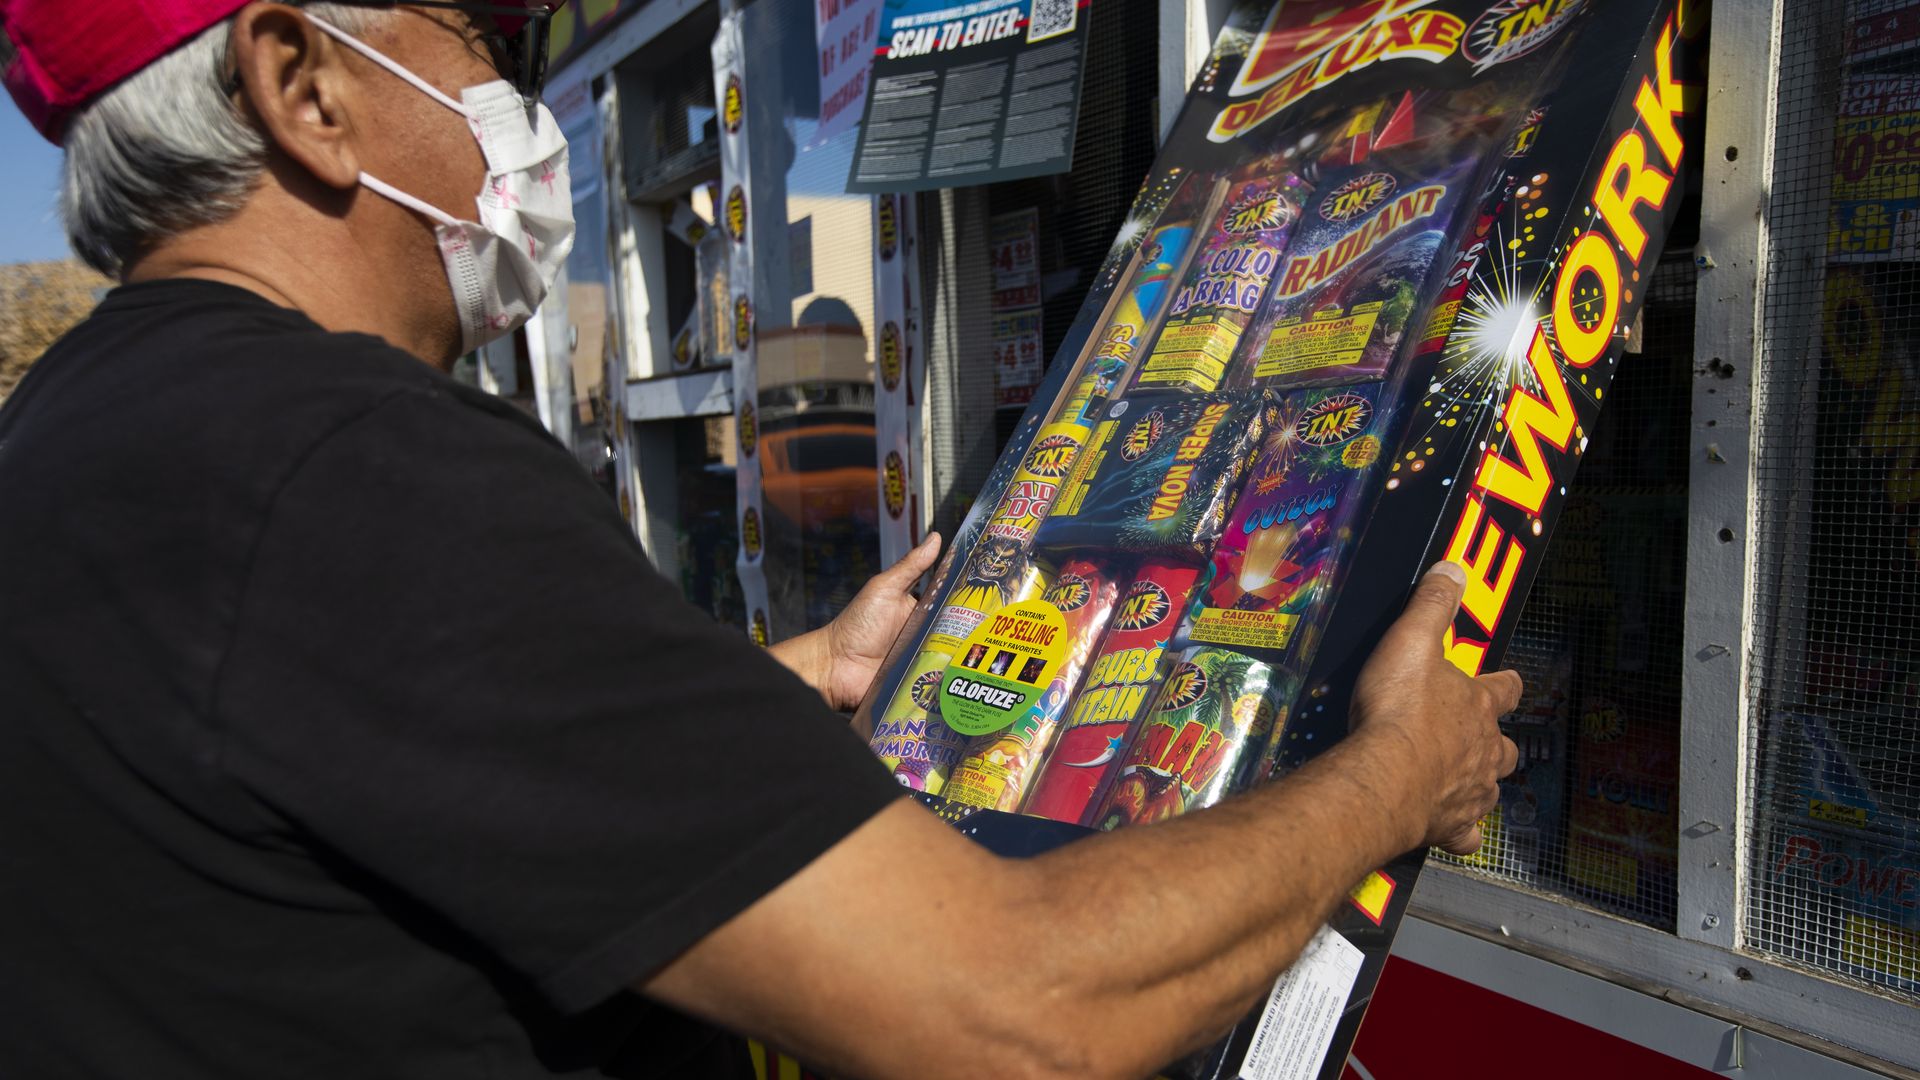 uan Carlos purchases fireworks five days prior to the 4th of July at a fireworks stand 